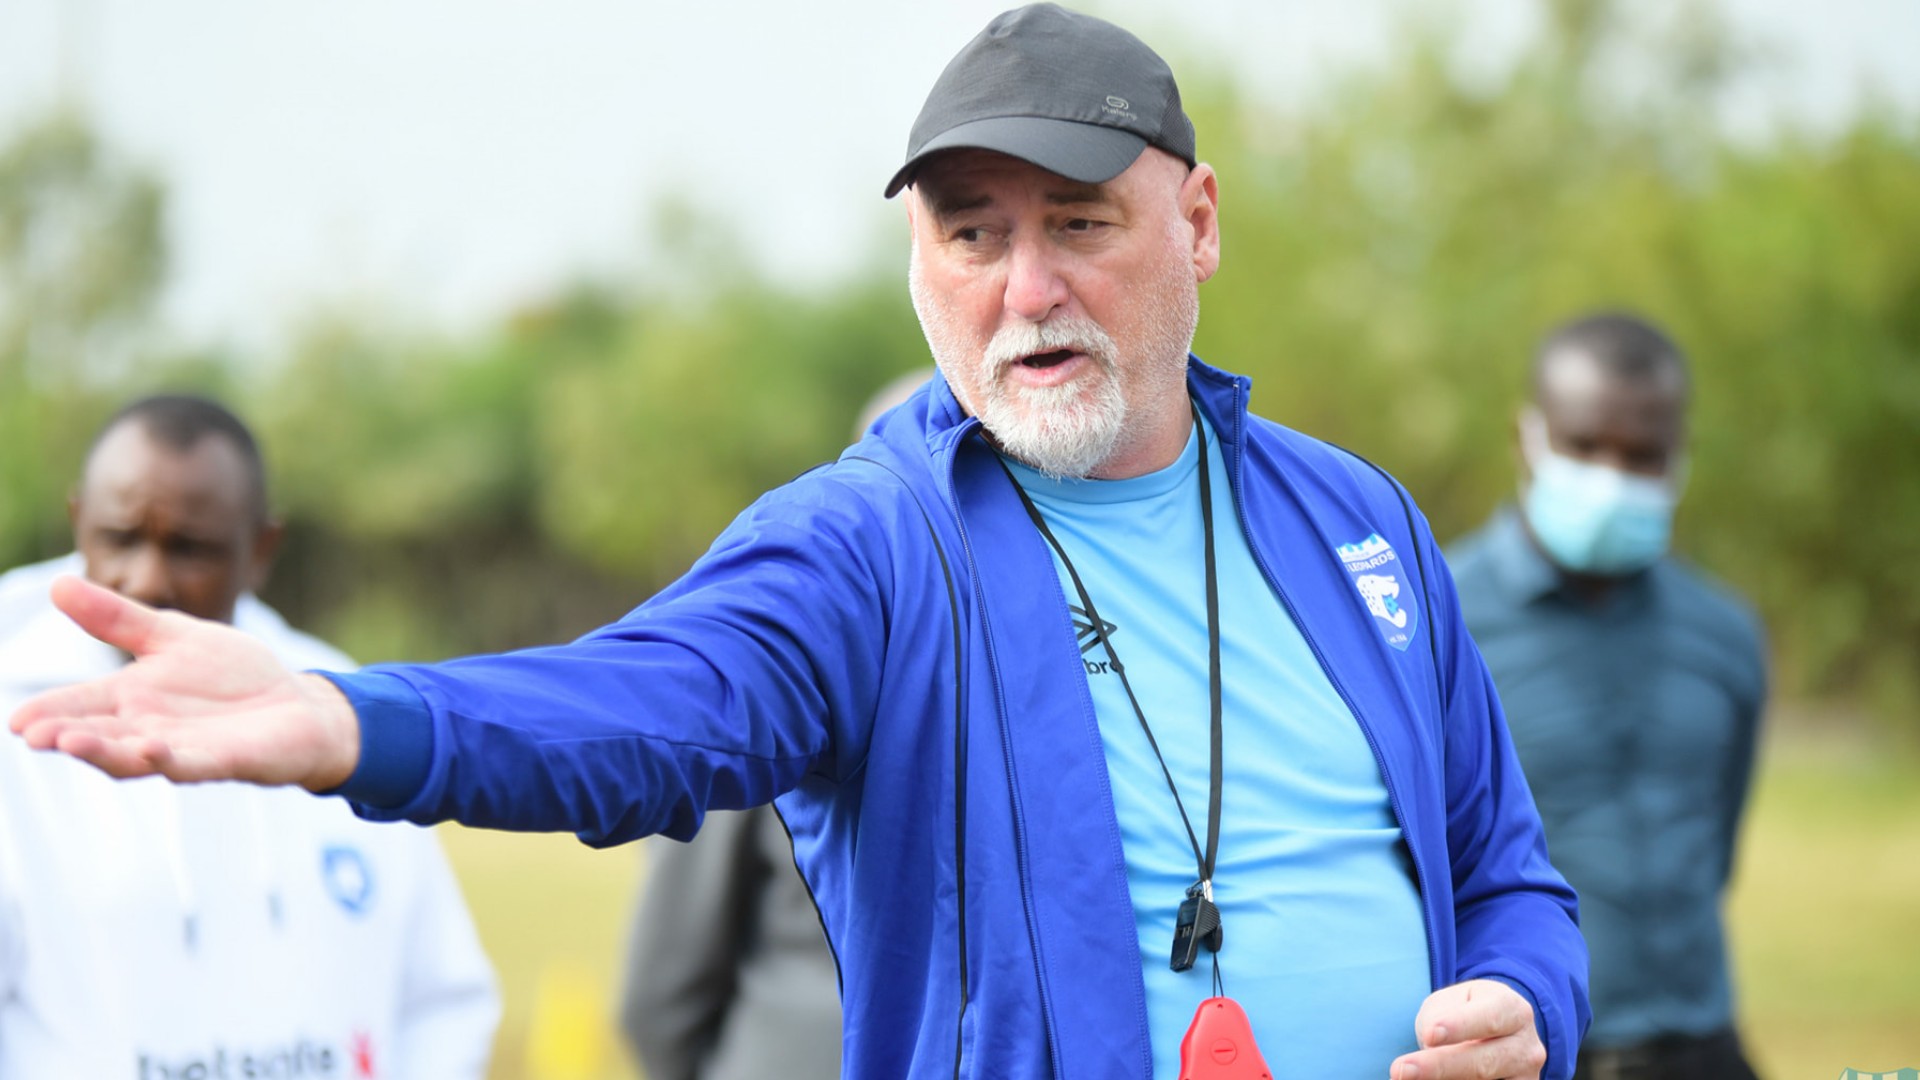 ‘Kenya football dragged through the mud by incompetent officials’ – AFC Leopards’ Aussems after Bandari loss